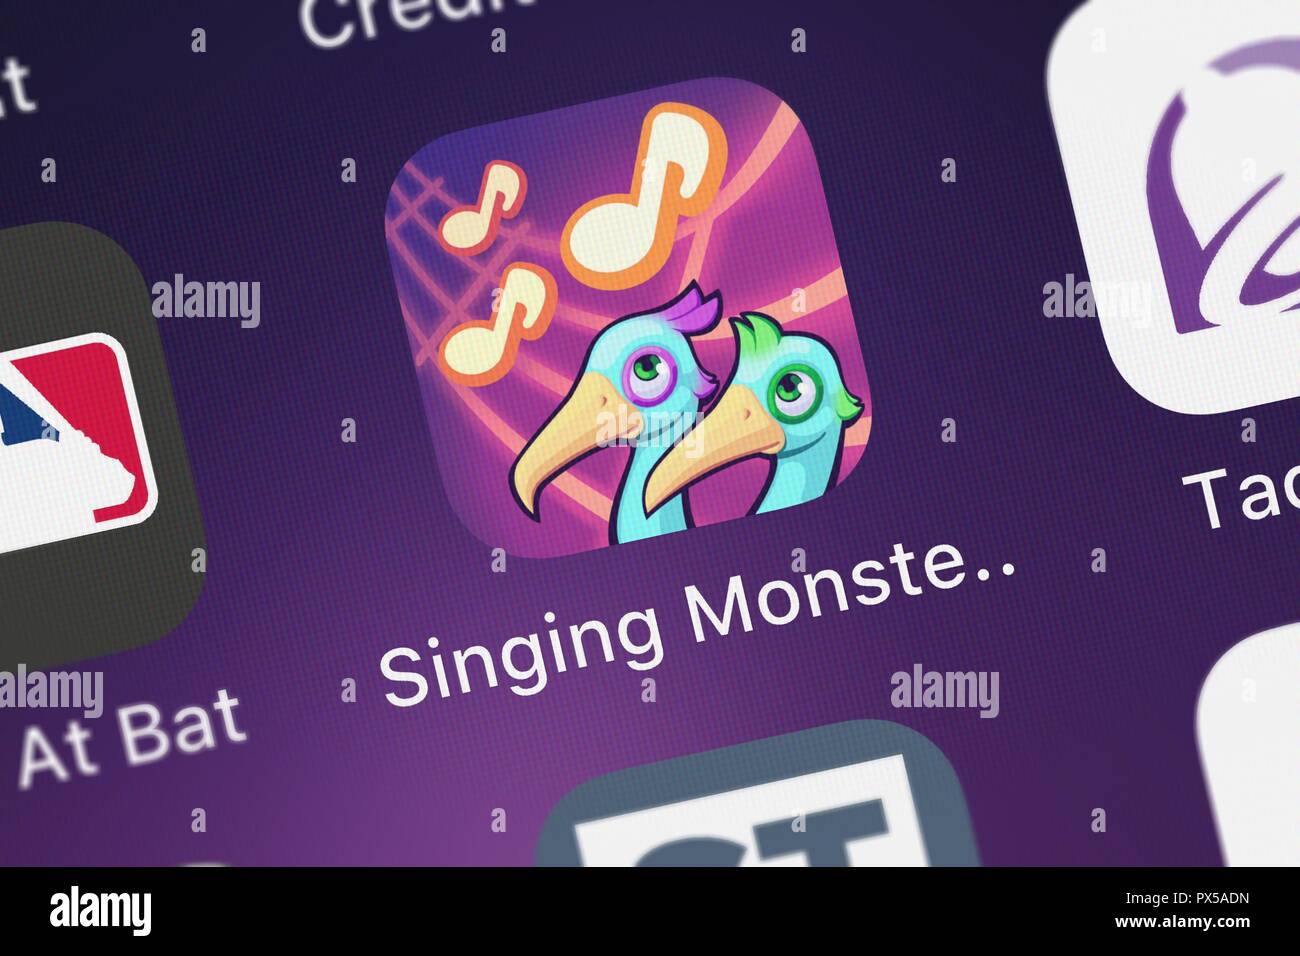 London, United Kingdom - October 19, 2018: Close-up shot of Big Blue Bubble's popular app My Singing Monsters Composer. Stock Photo